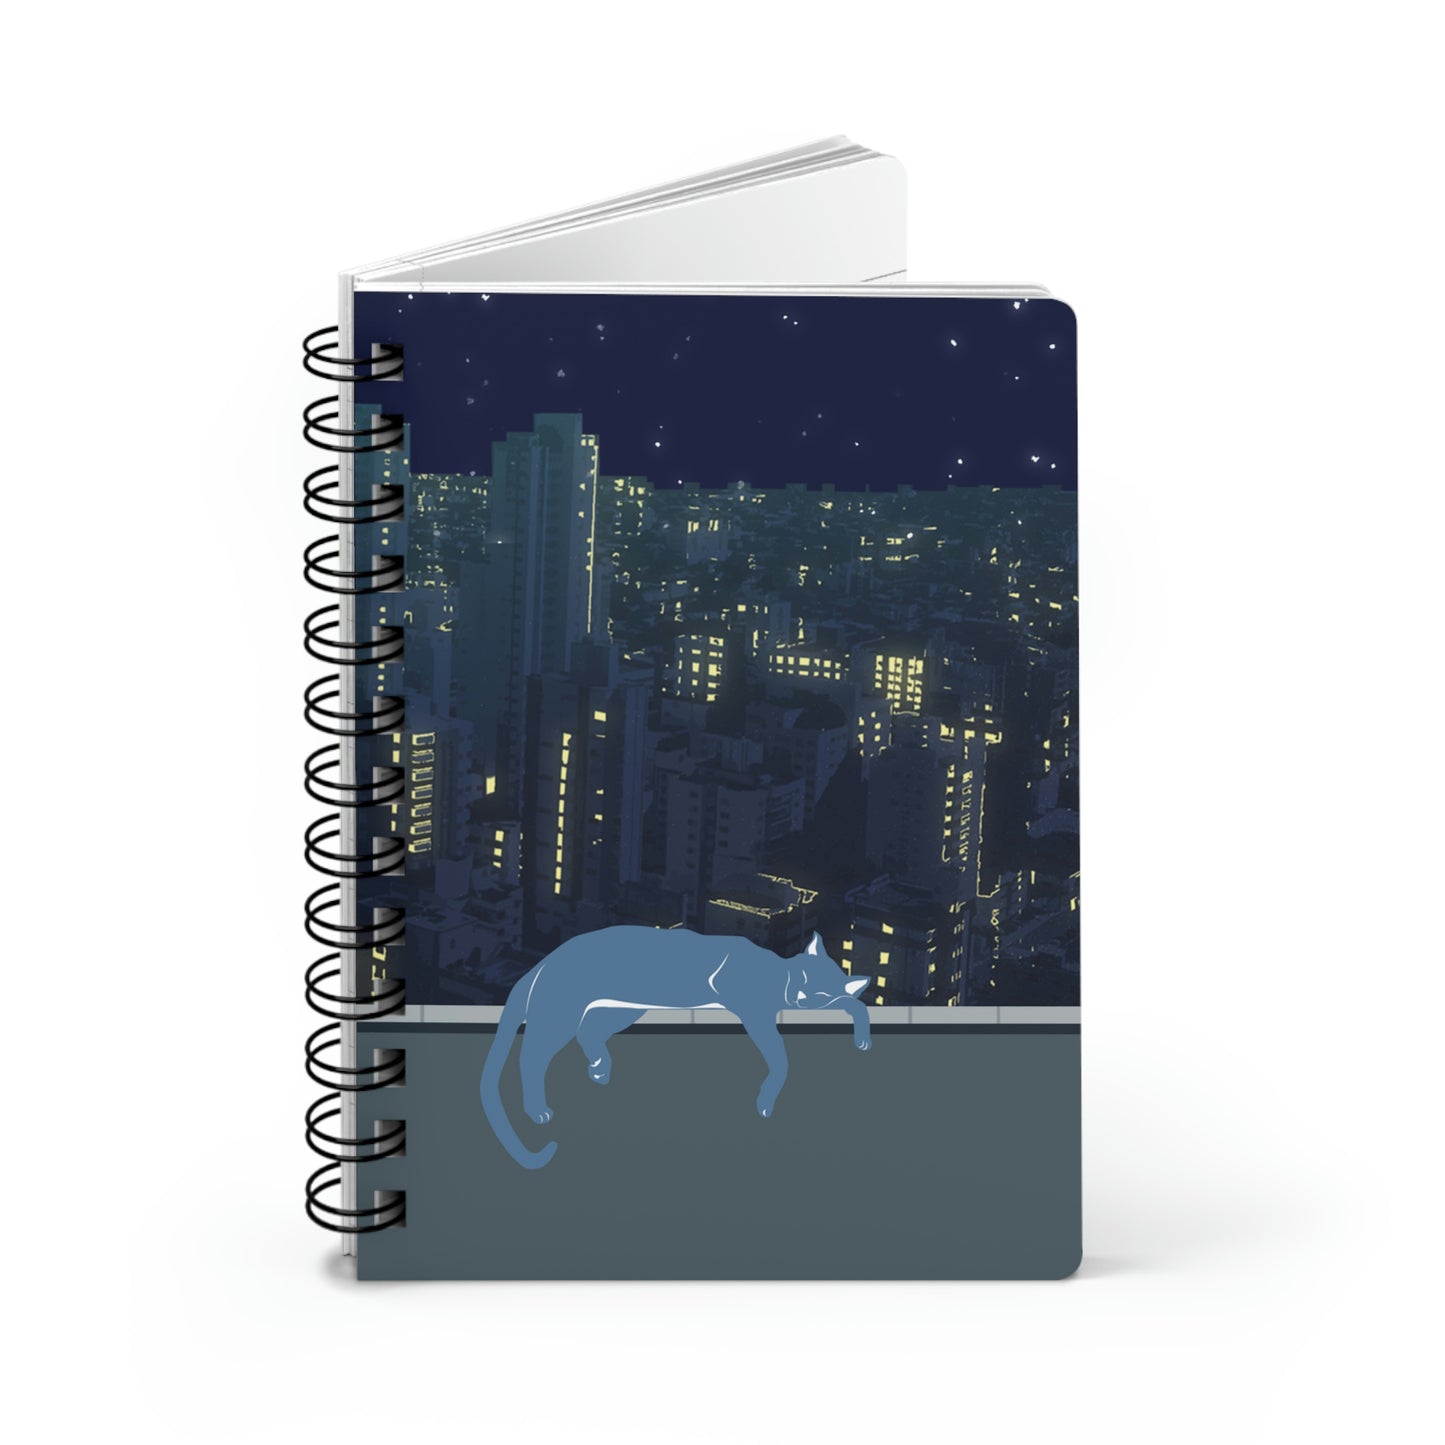 Stray cat in a city Spiral Bound Journal, Cool Cat traveler notebook, Coworker cat Gift, Cat lover gift, Urban Cat Notebook, back to school